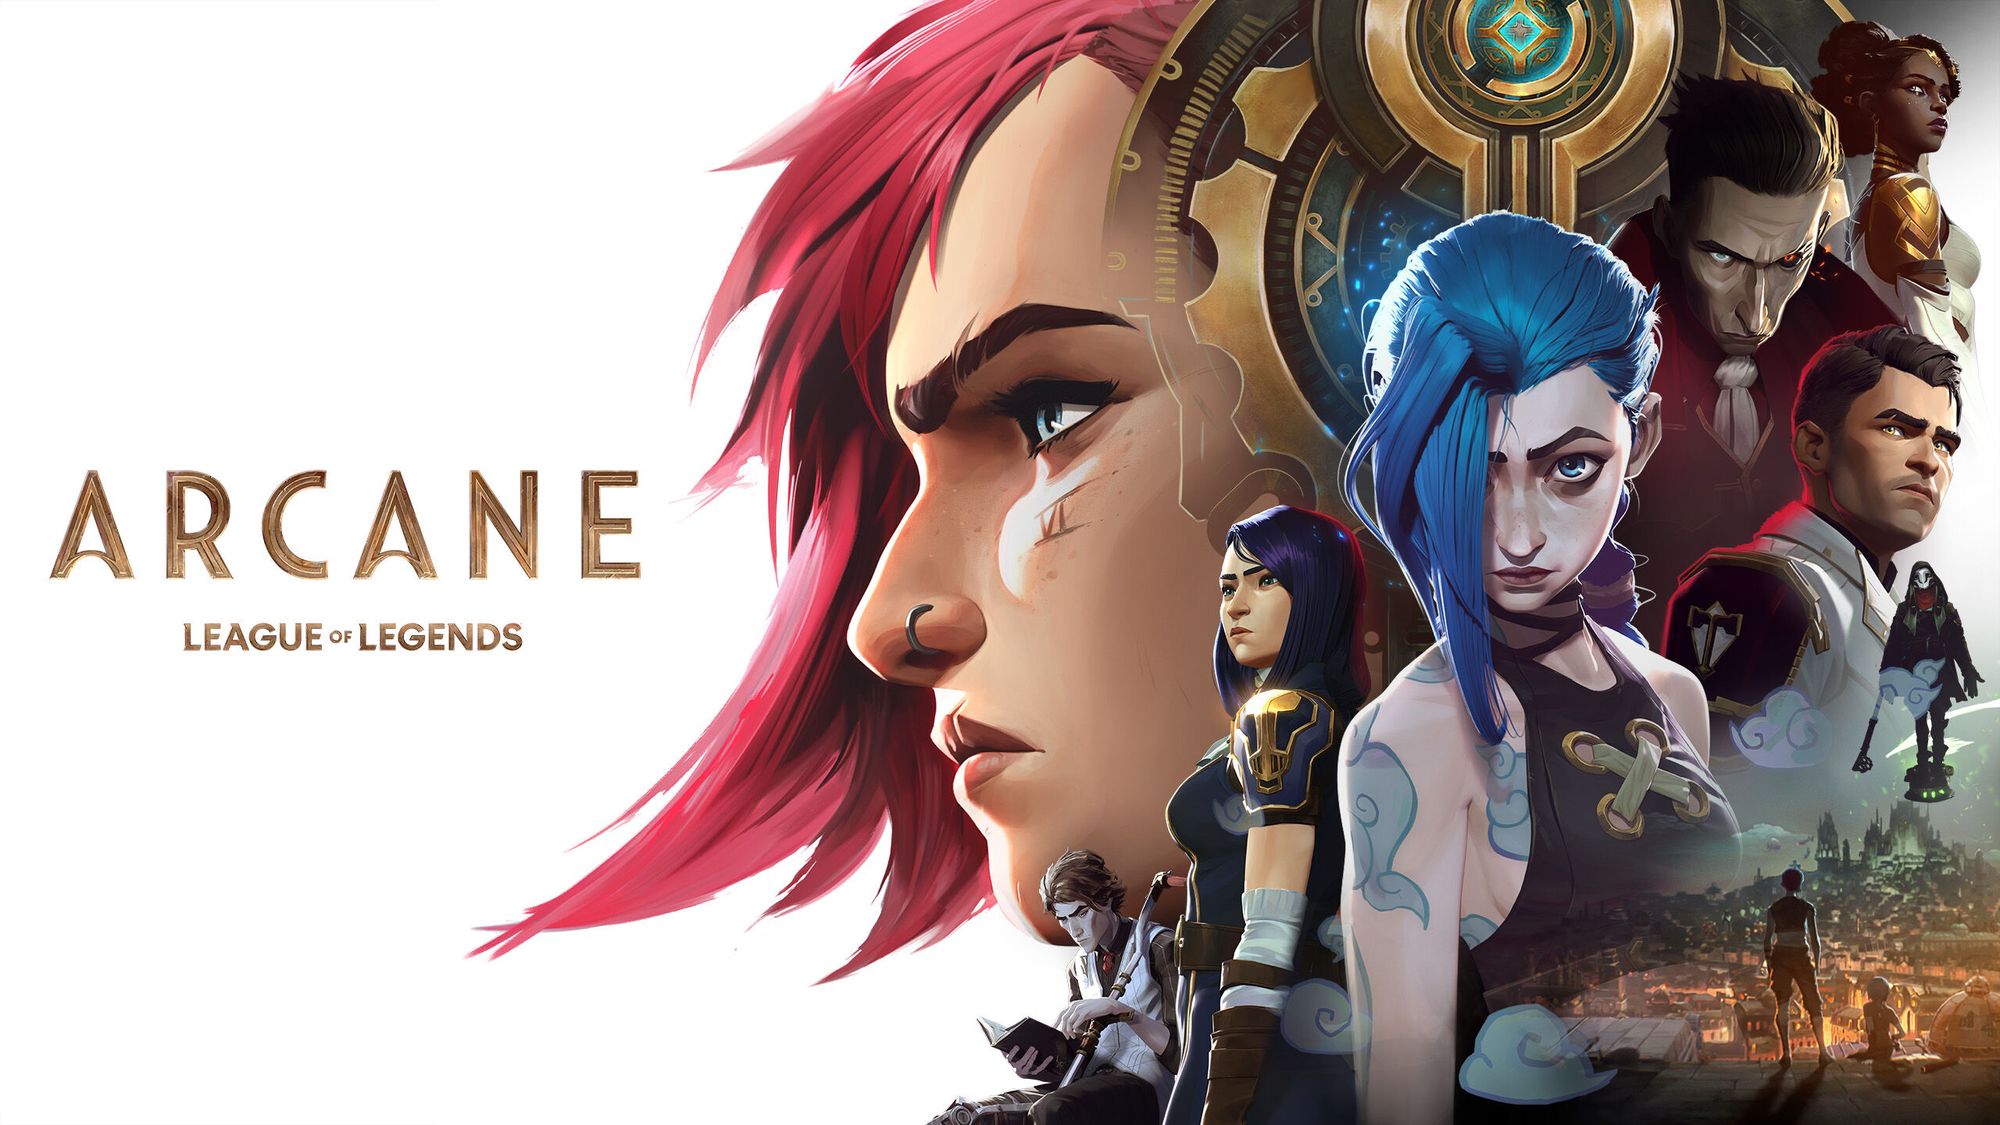 Arcane: Everything You Need To Know To Watch The League Of Legends Animated Series On Netflix